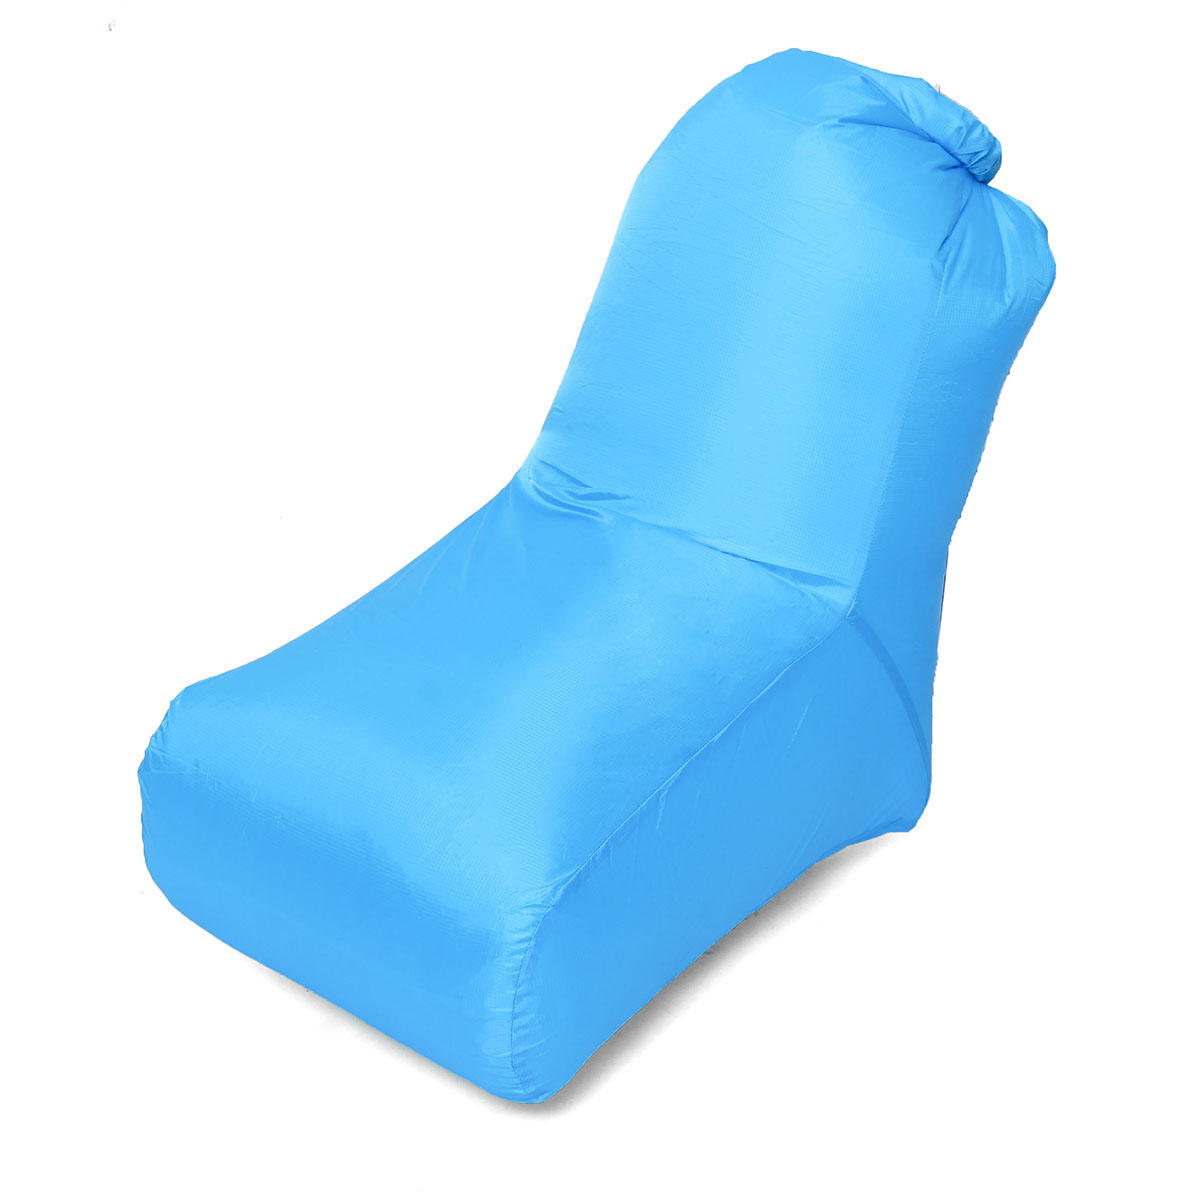 

85x75cm Air Inflatable Lazy Sofa Foldable Sleeping Rest Lounger Couch Beach Chair Max Load 150kg Outdoor Camping